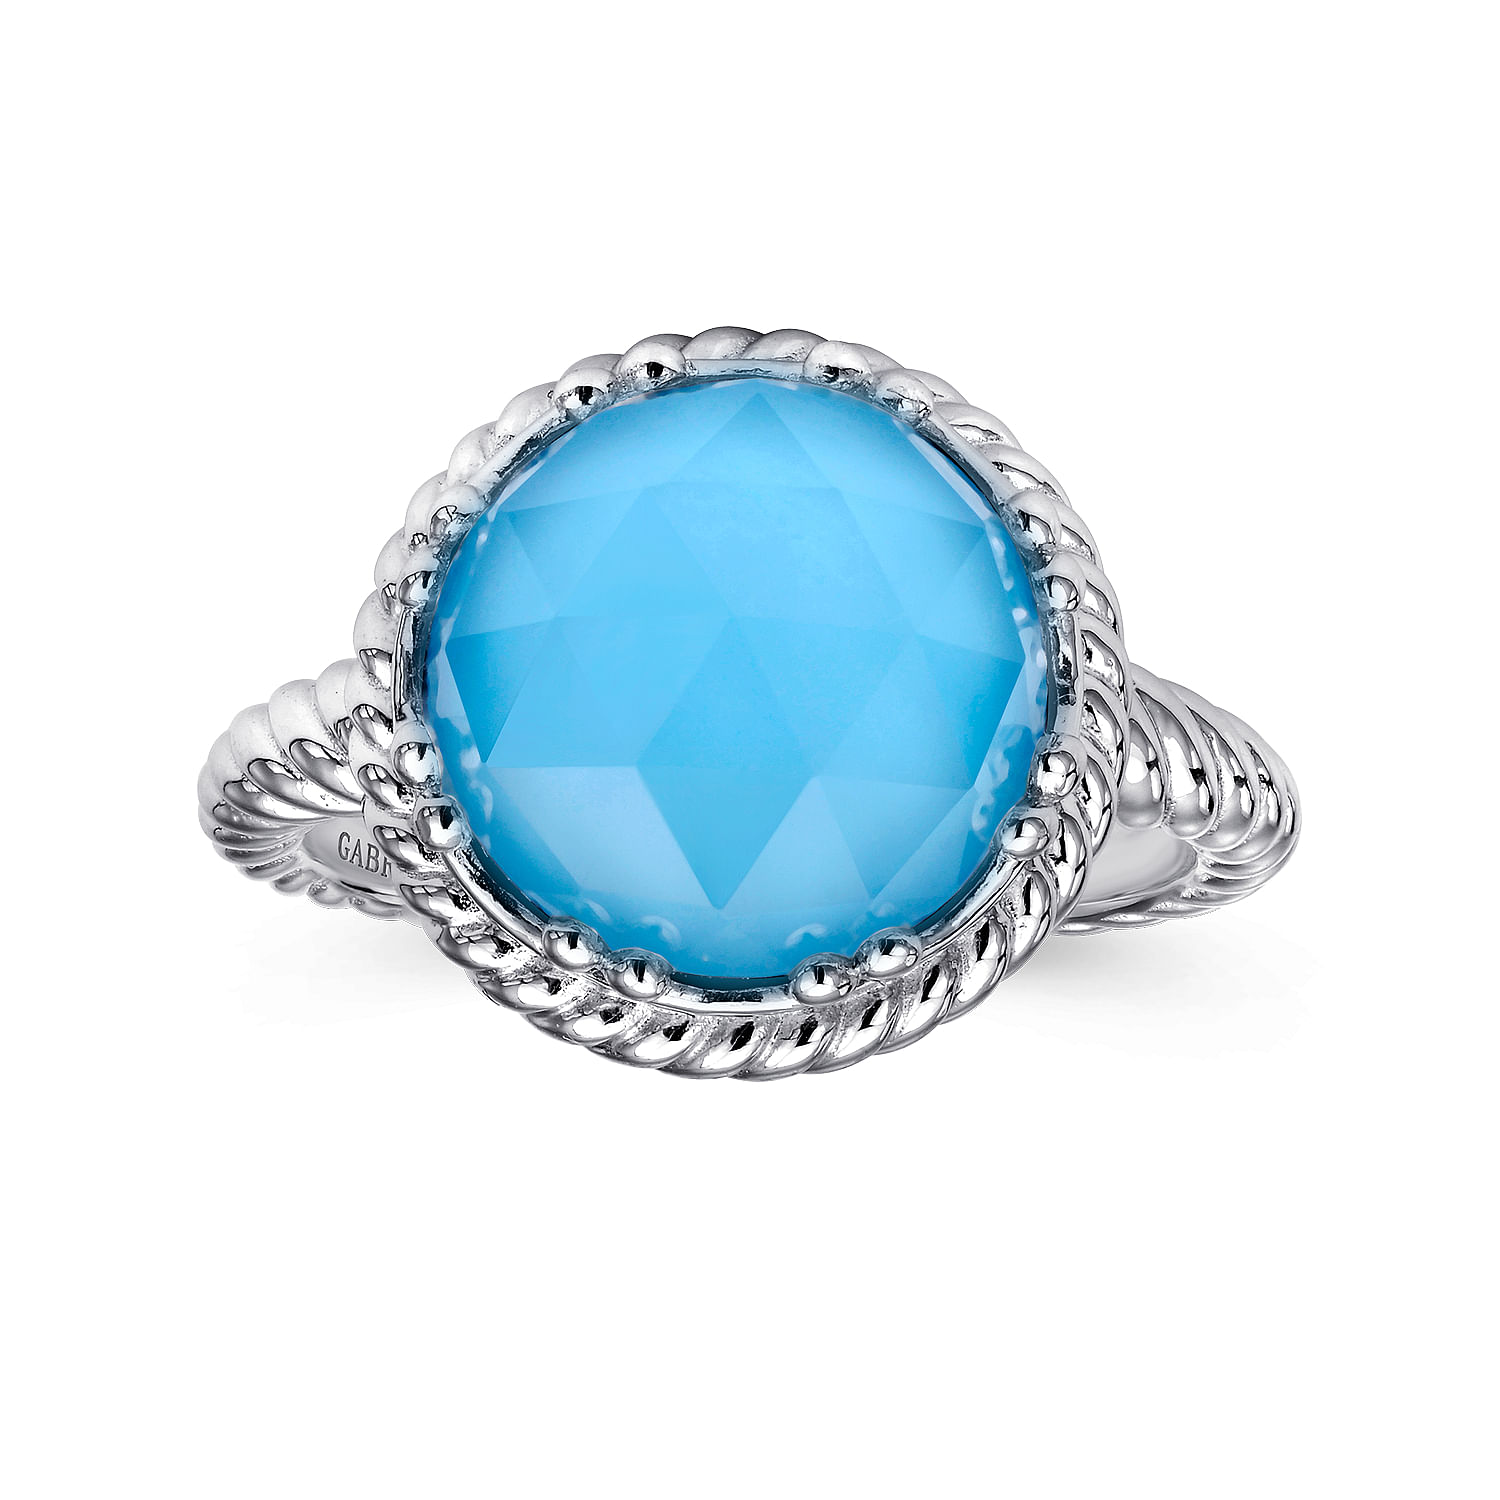 Sterling Silver Round Rock Crystal and Turquoise Twisted Rope Ring